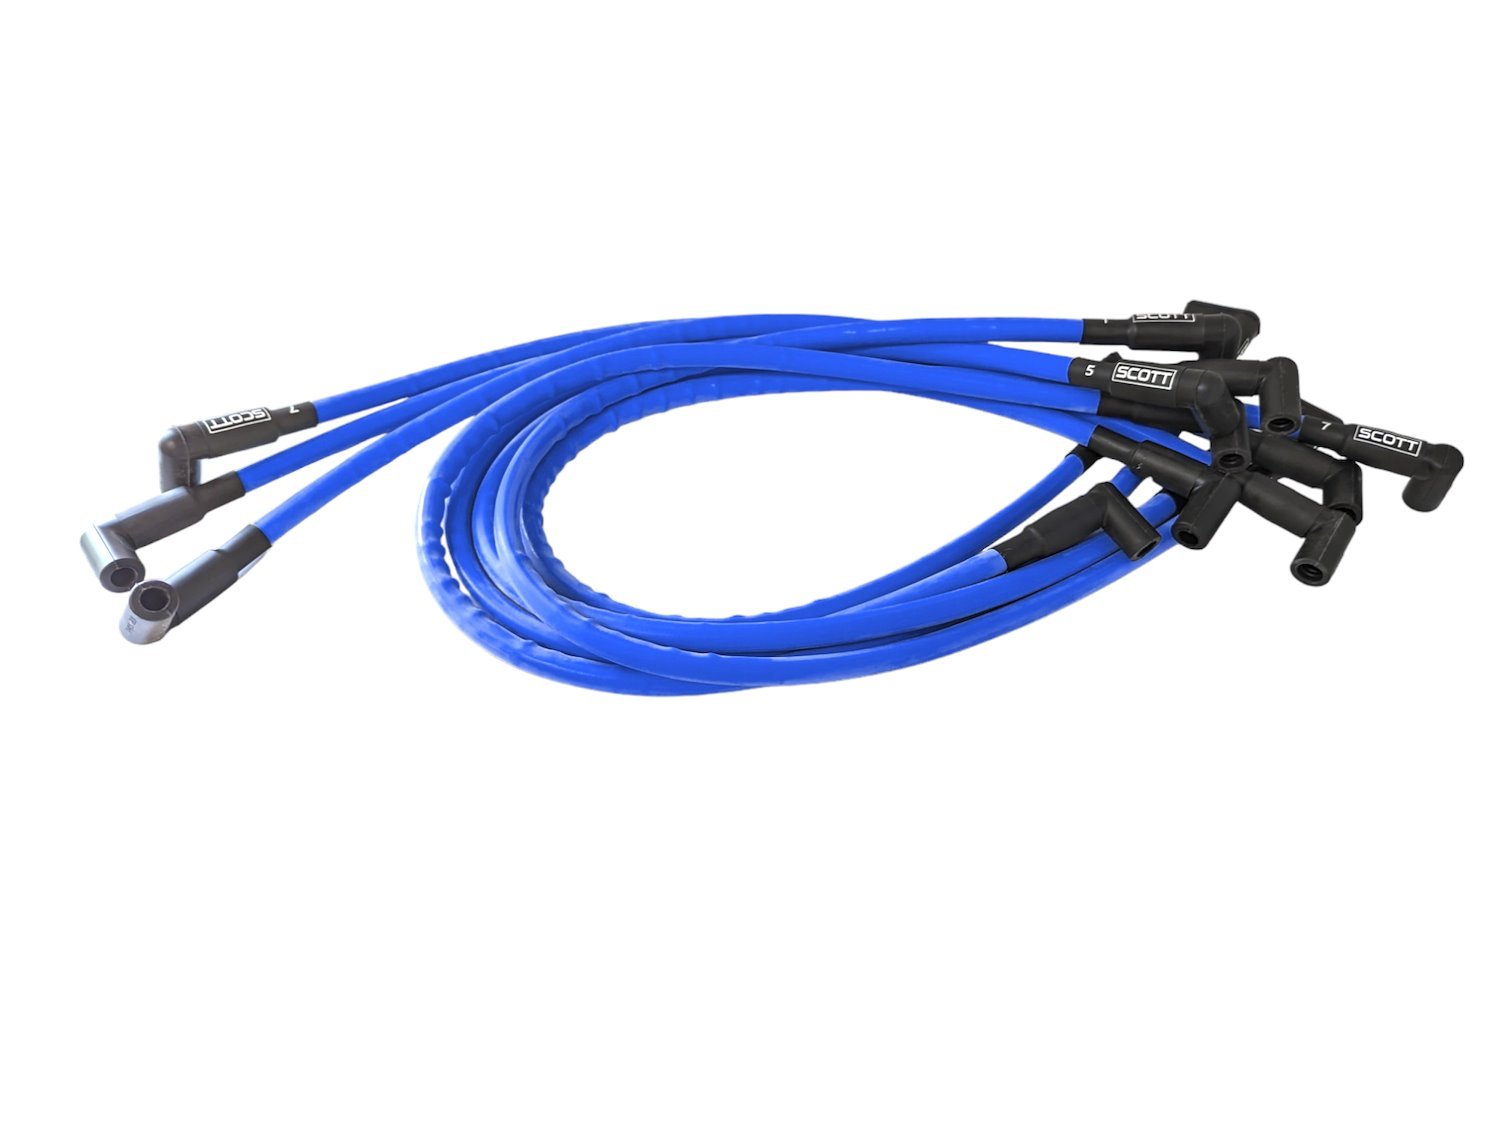 SPW300-CH-435-4 Super Mag Fiberglass-Oversleeved Spark Plug Wire Set for Small Block Chevy, Around Front [Blue]